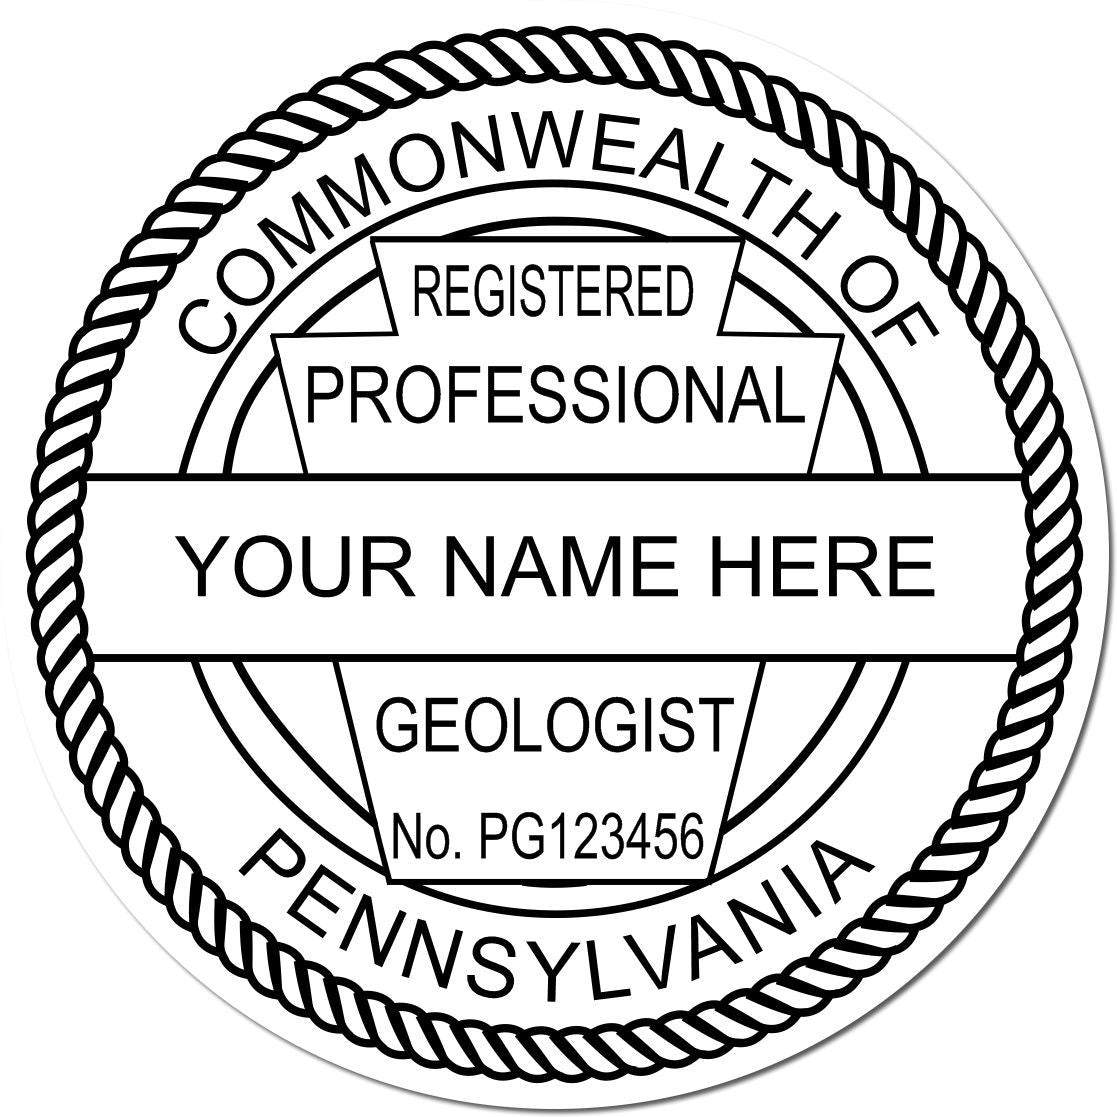 This paper is stamped with a sample imprint of the Slim Pre-Inked Pennsylvania Professional Geologist Seal Stamp, signifying its quality and reliability.